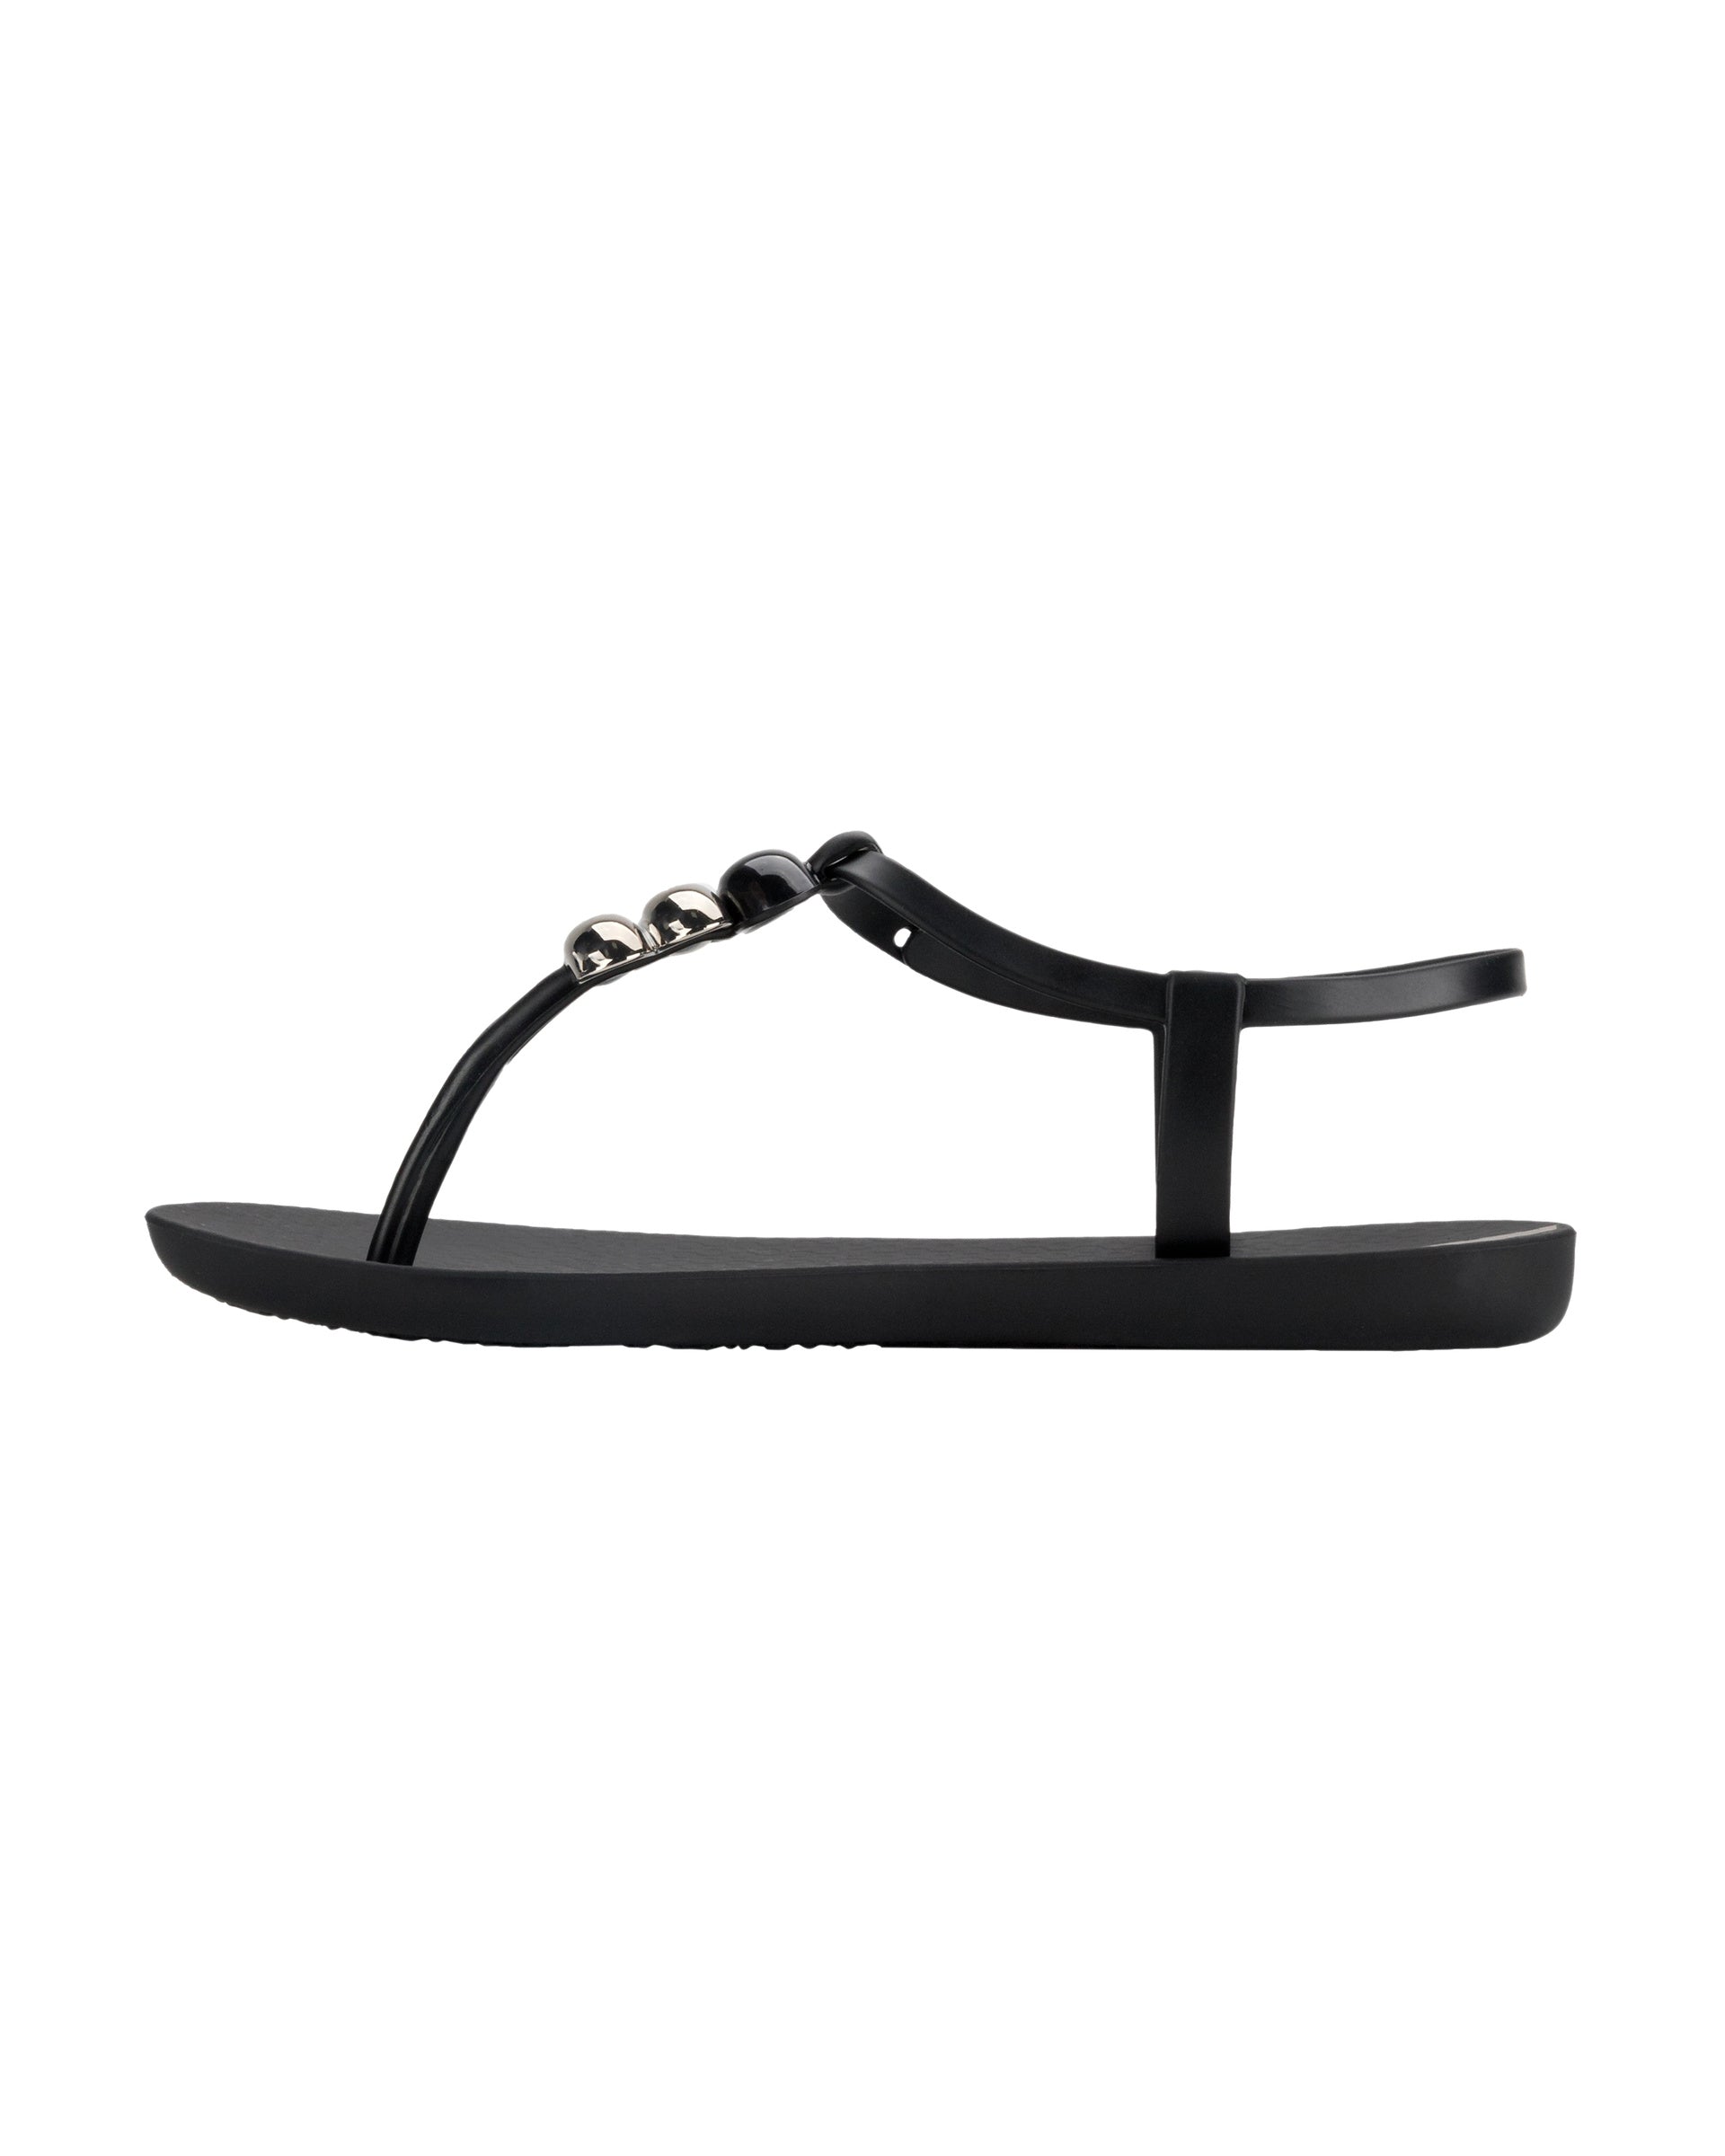 Inner side view of a black Ipanema Class women's sandal with 3 bubble baubles on the t-strap.